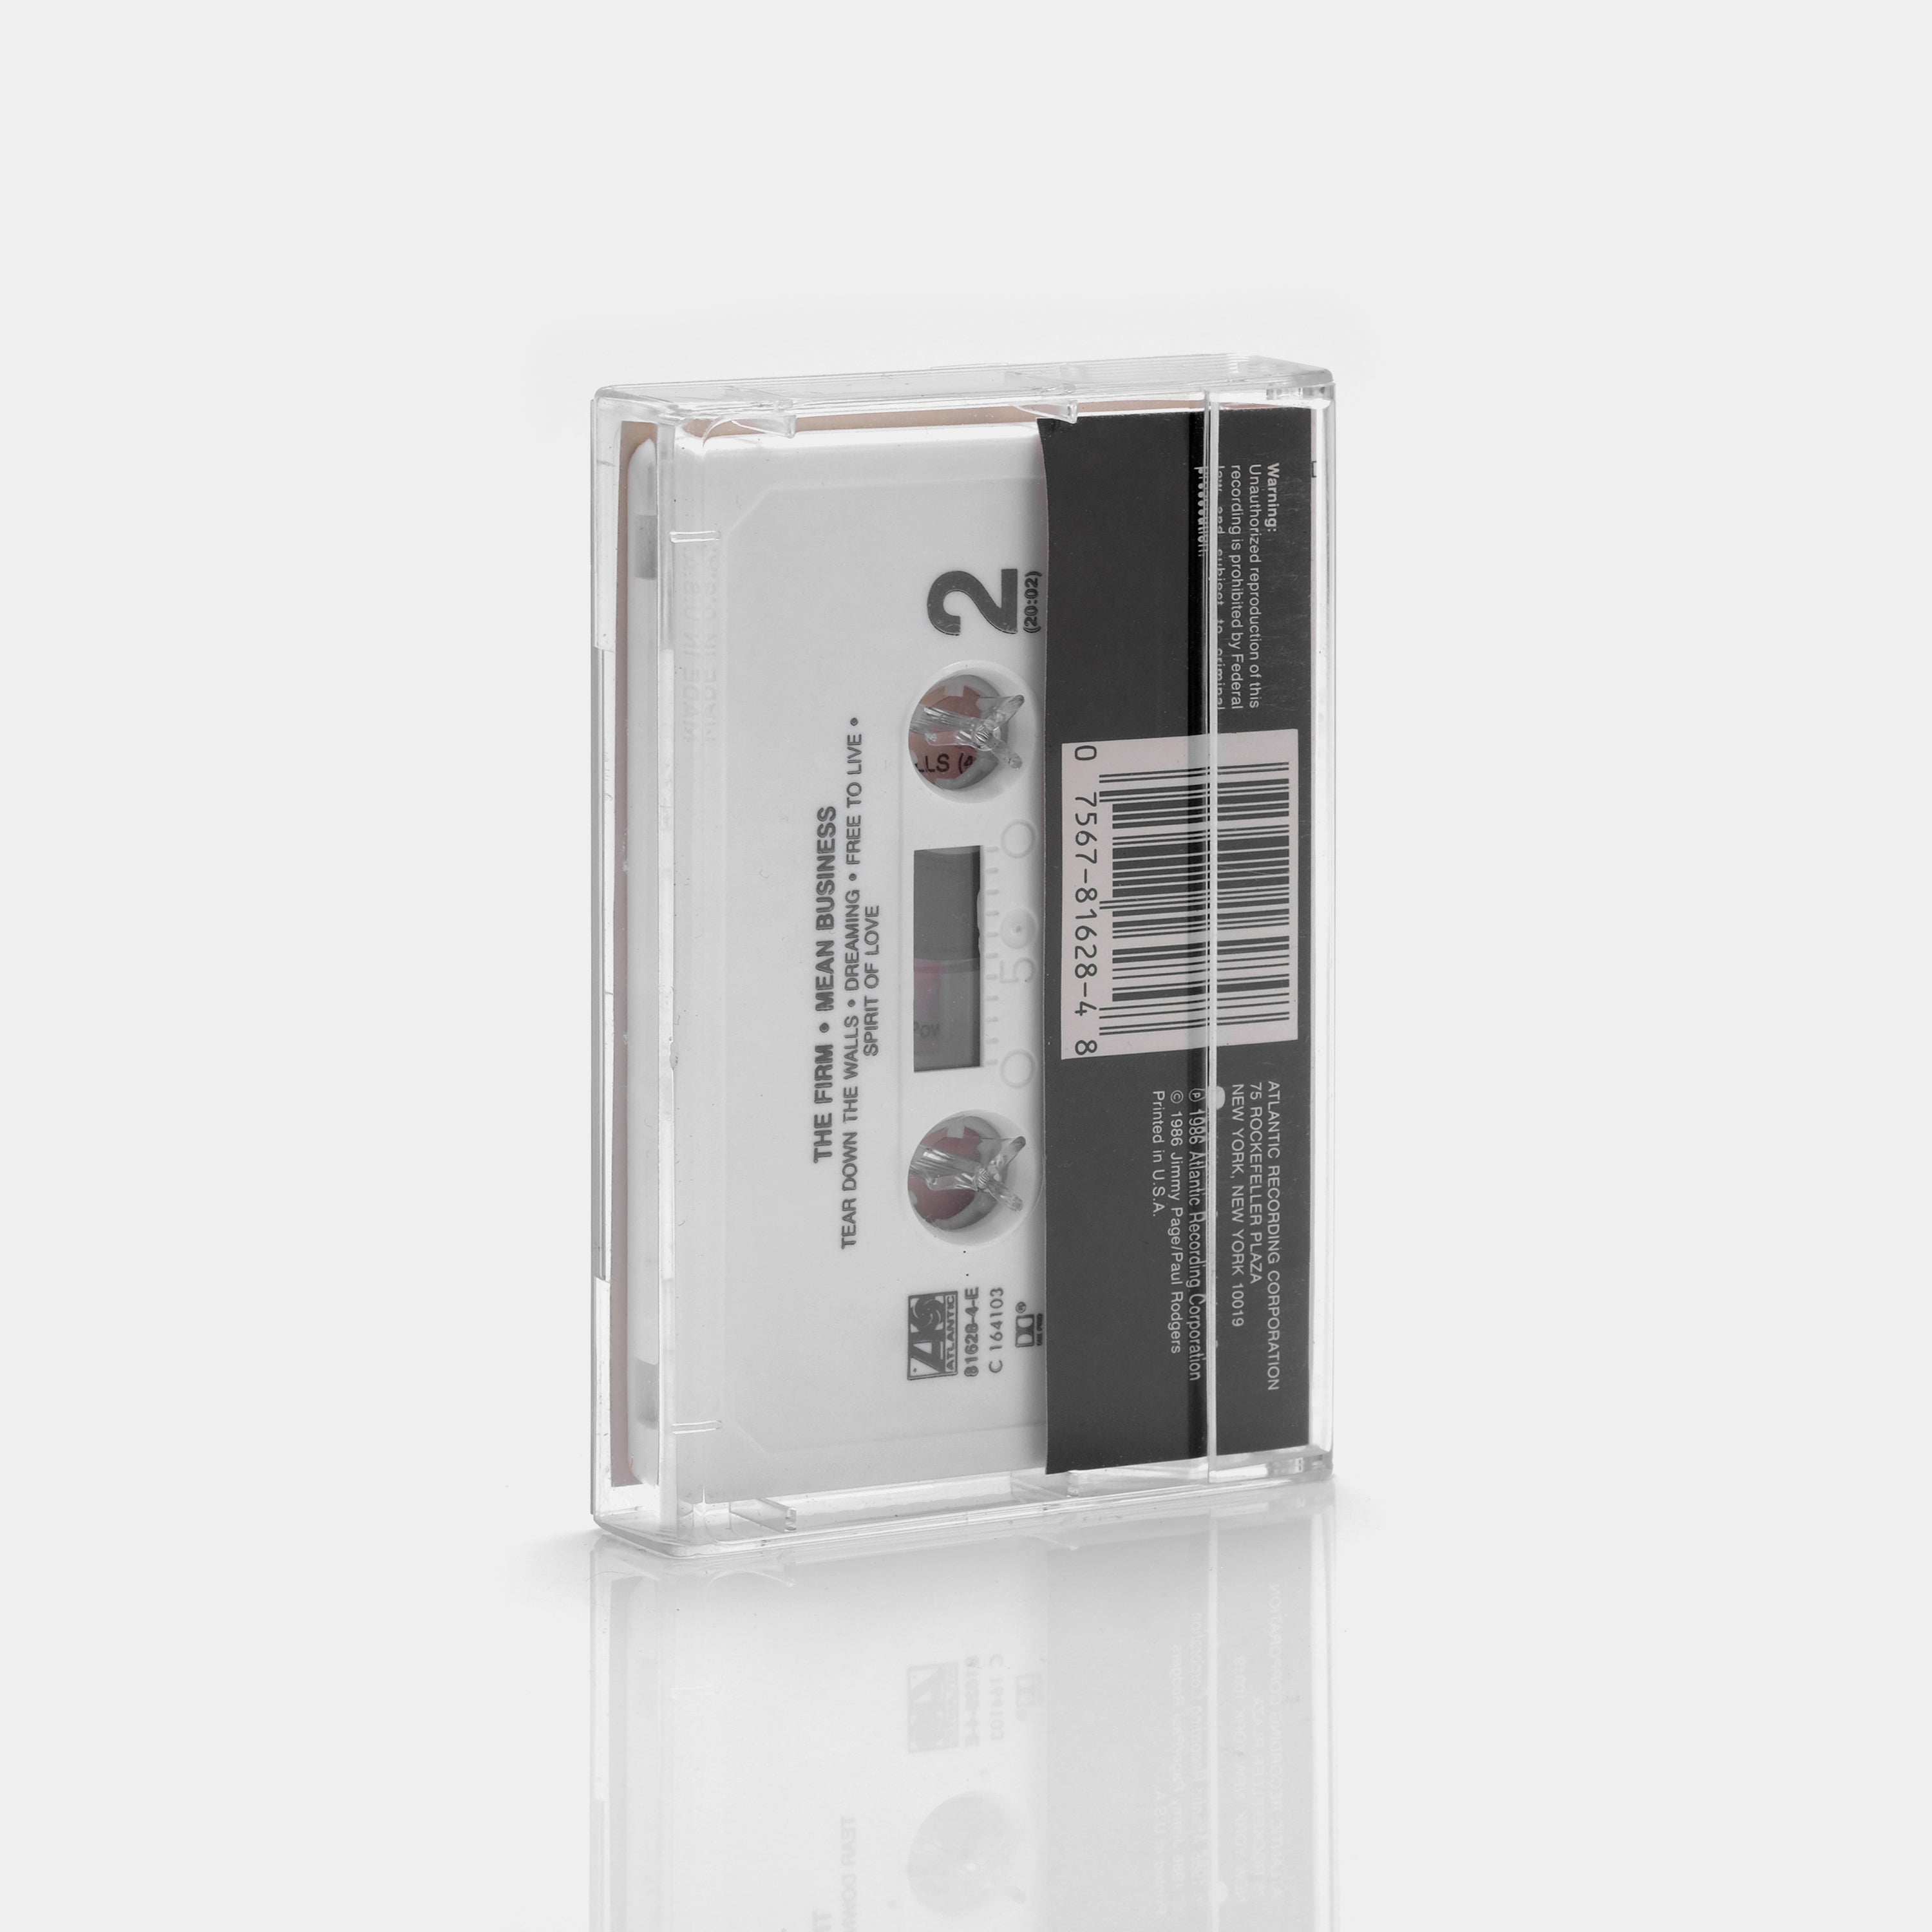 The Firm - Mean Business Cassette Tape